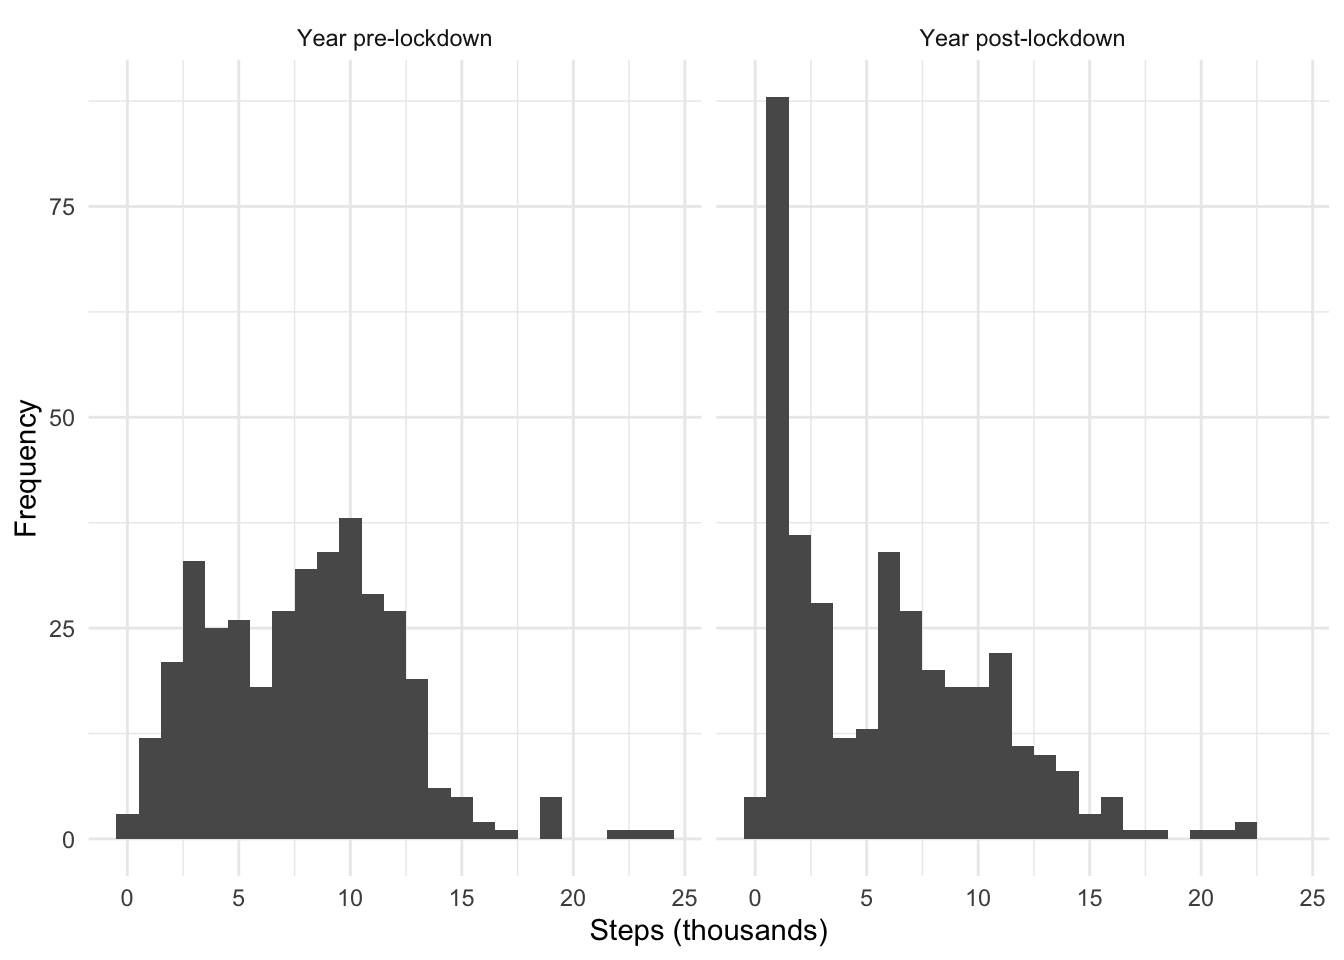 Side-by-side histograms of step counts before and after lockdown. Before lockdown, a bimodal distribution with peaks at about 3 and 10 km steps. After lockdown, a big peak at about 1 km and a peak at about 6 km with a tail to about 20 km.